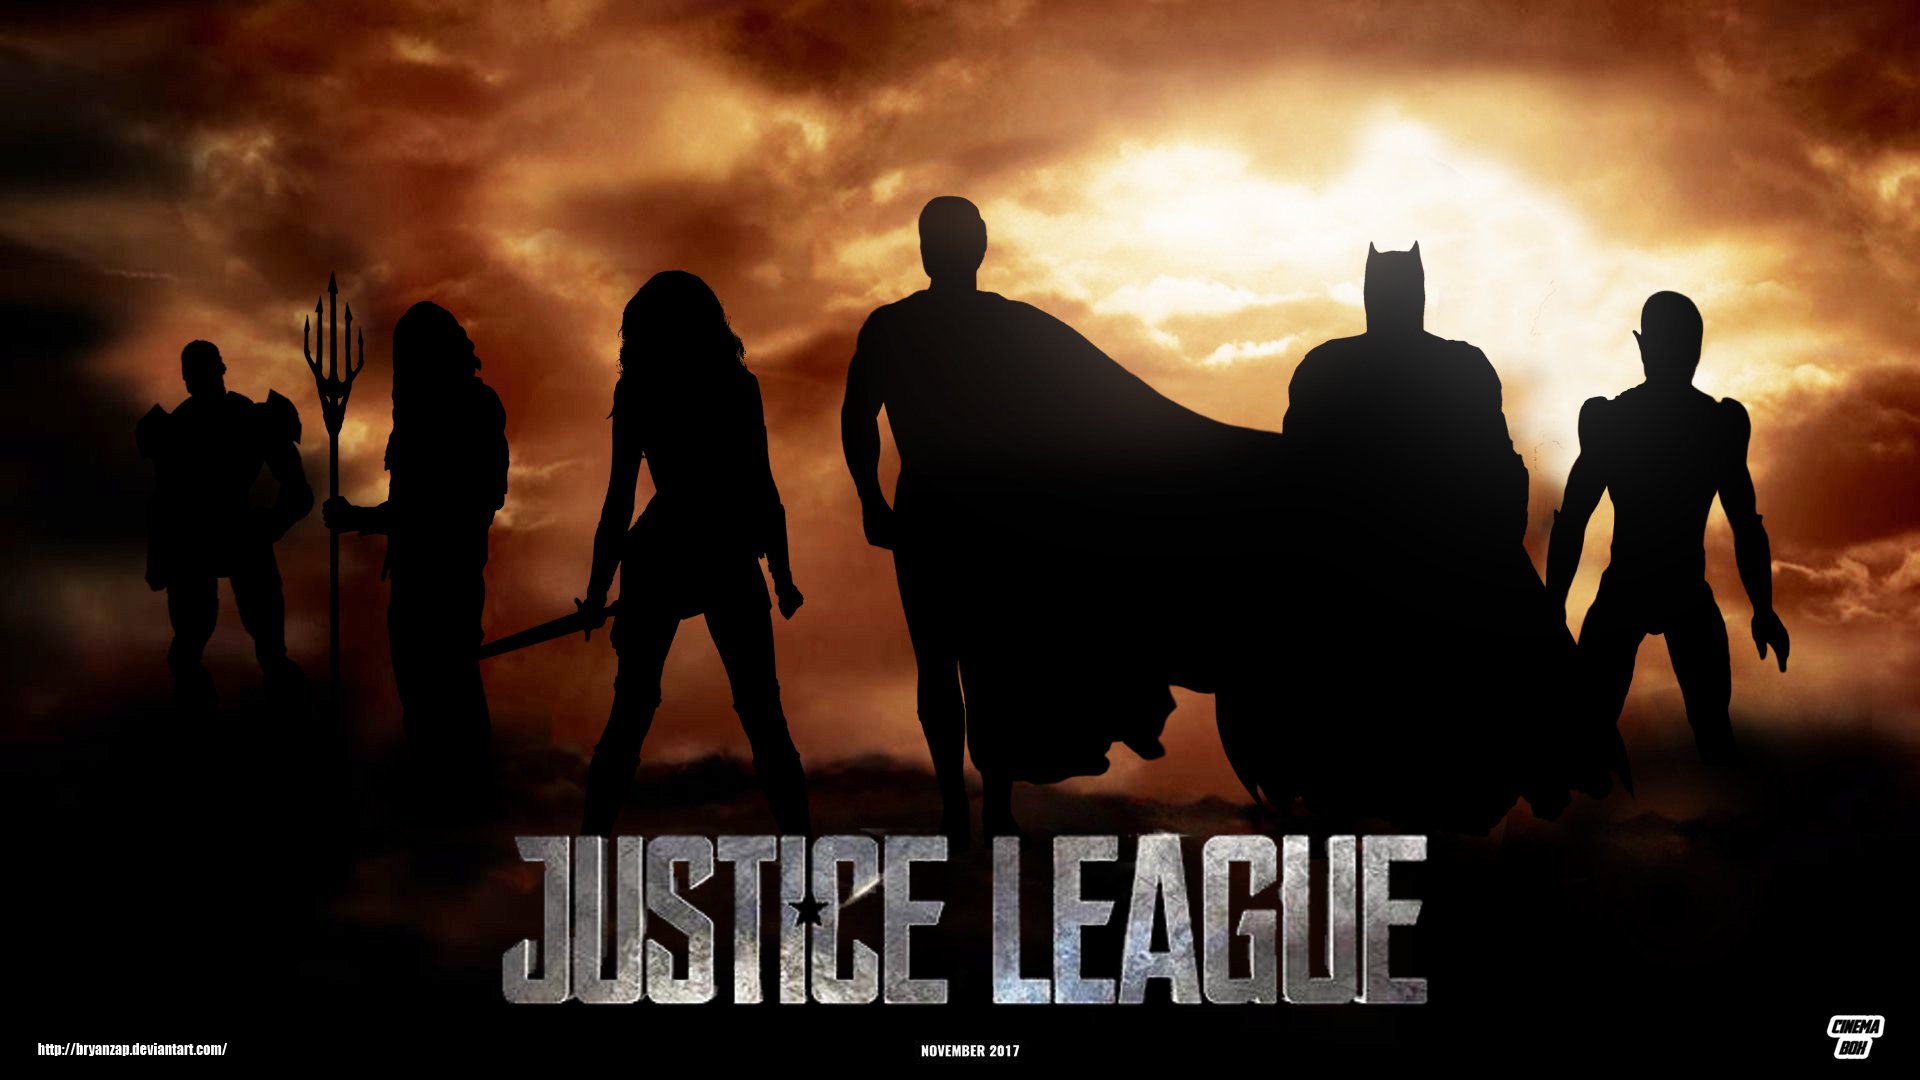 Justice League (2017) HD Wallpaper  Background Image 